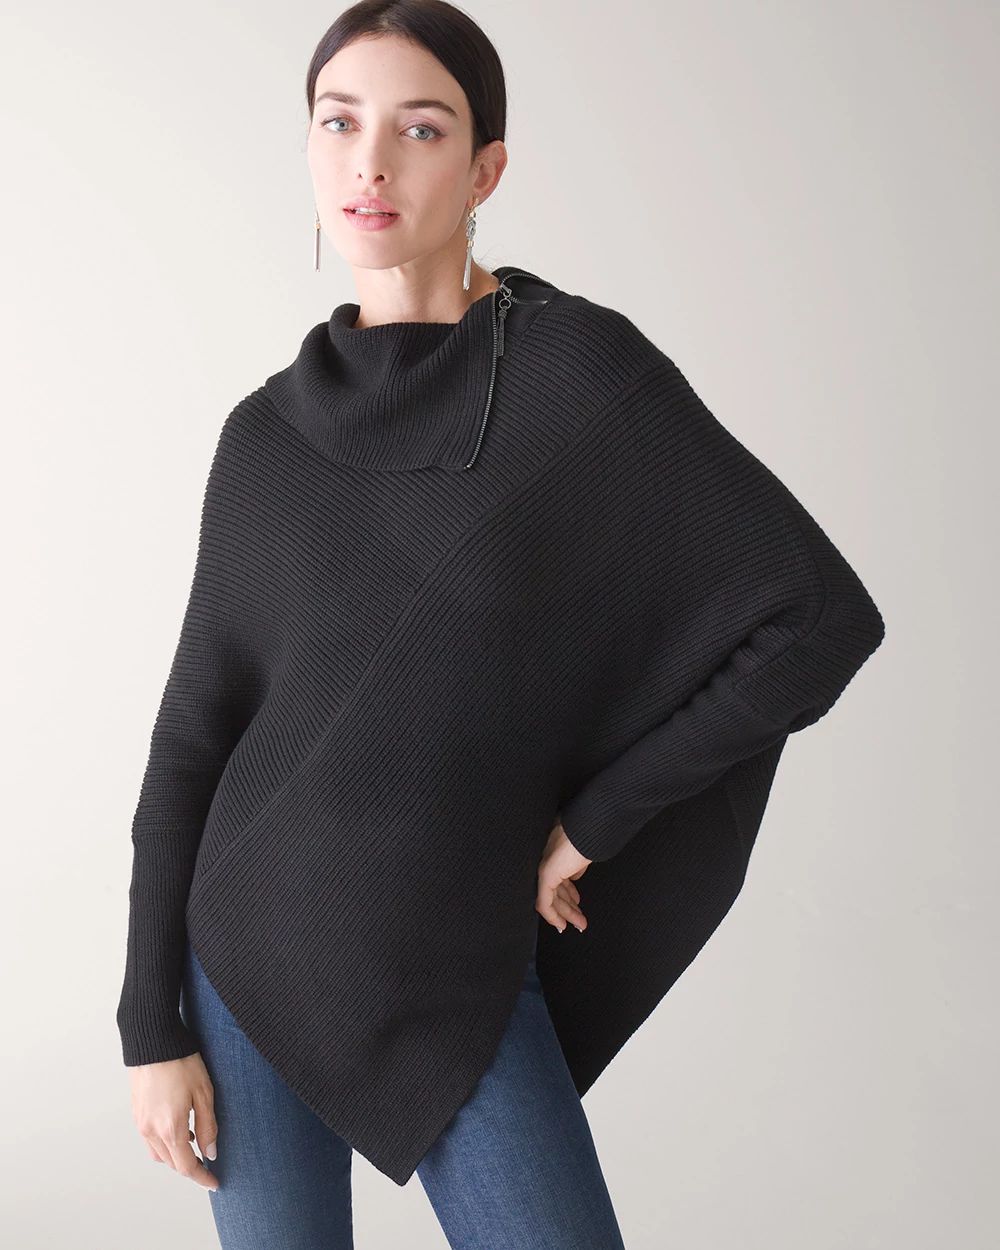 Zip Split Neck Poncho Sweater click to view larger image.